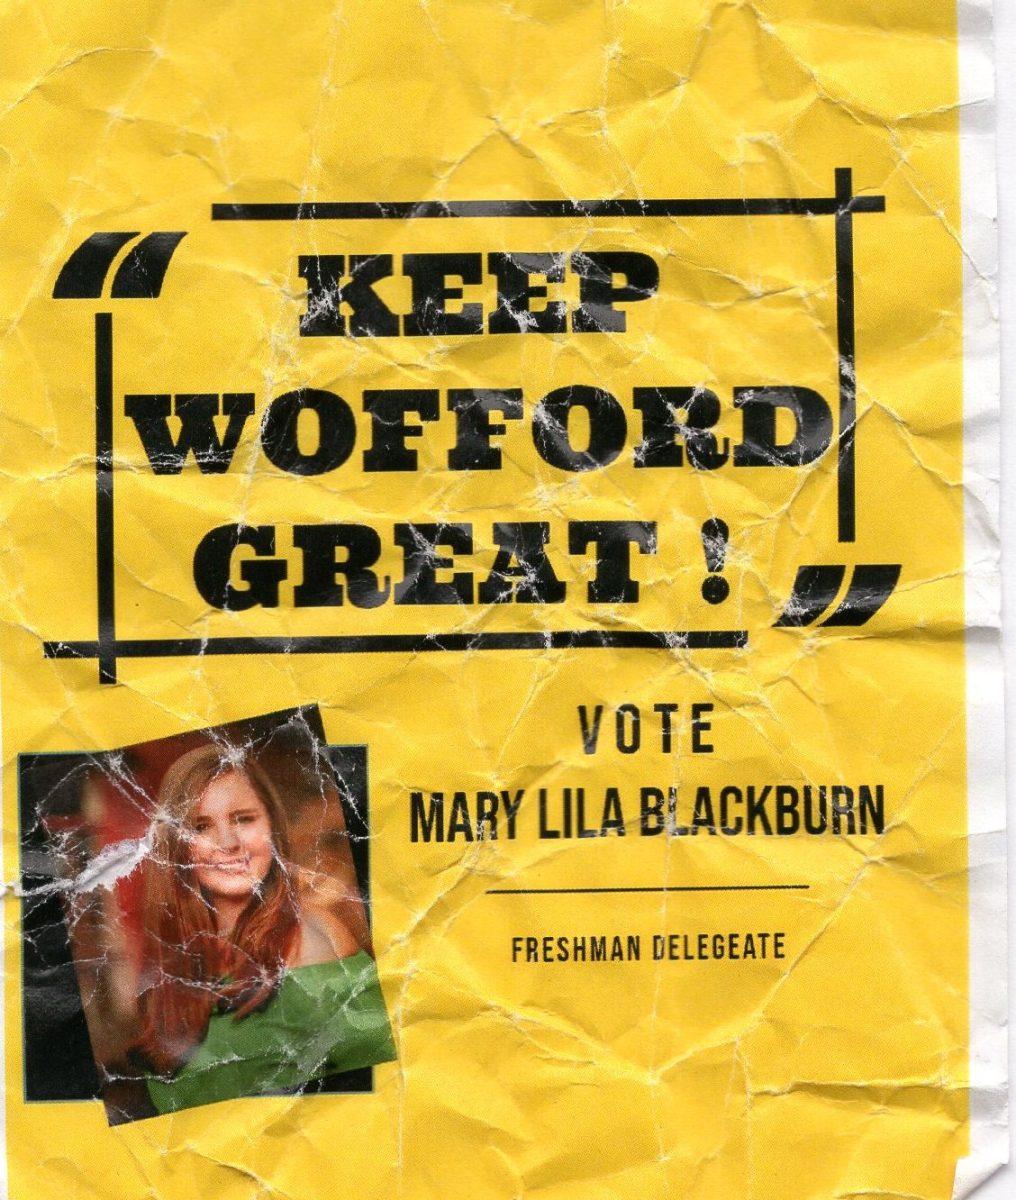 First-year+Mary+Lila+Blackburn%E2%80%99s+campaign+flyer+for+the+Campus+Union+delegate+election+with+the+slogan%2C+%E2%80%9CKeep+Wofford+Great%E2%80%9D